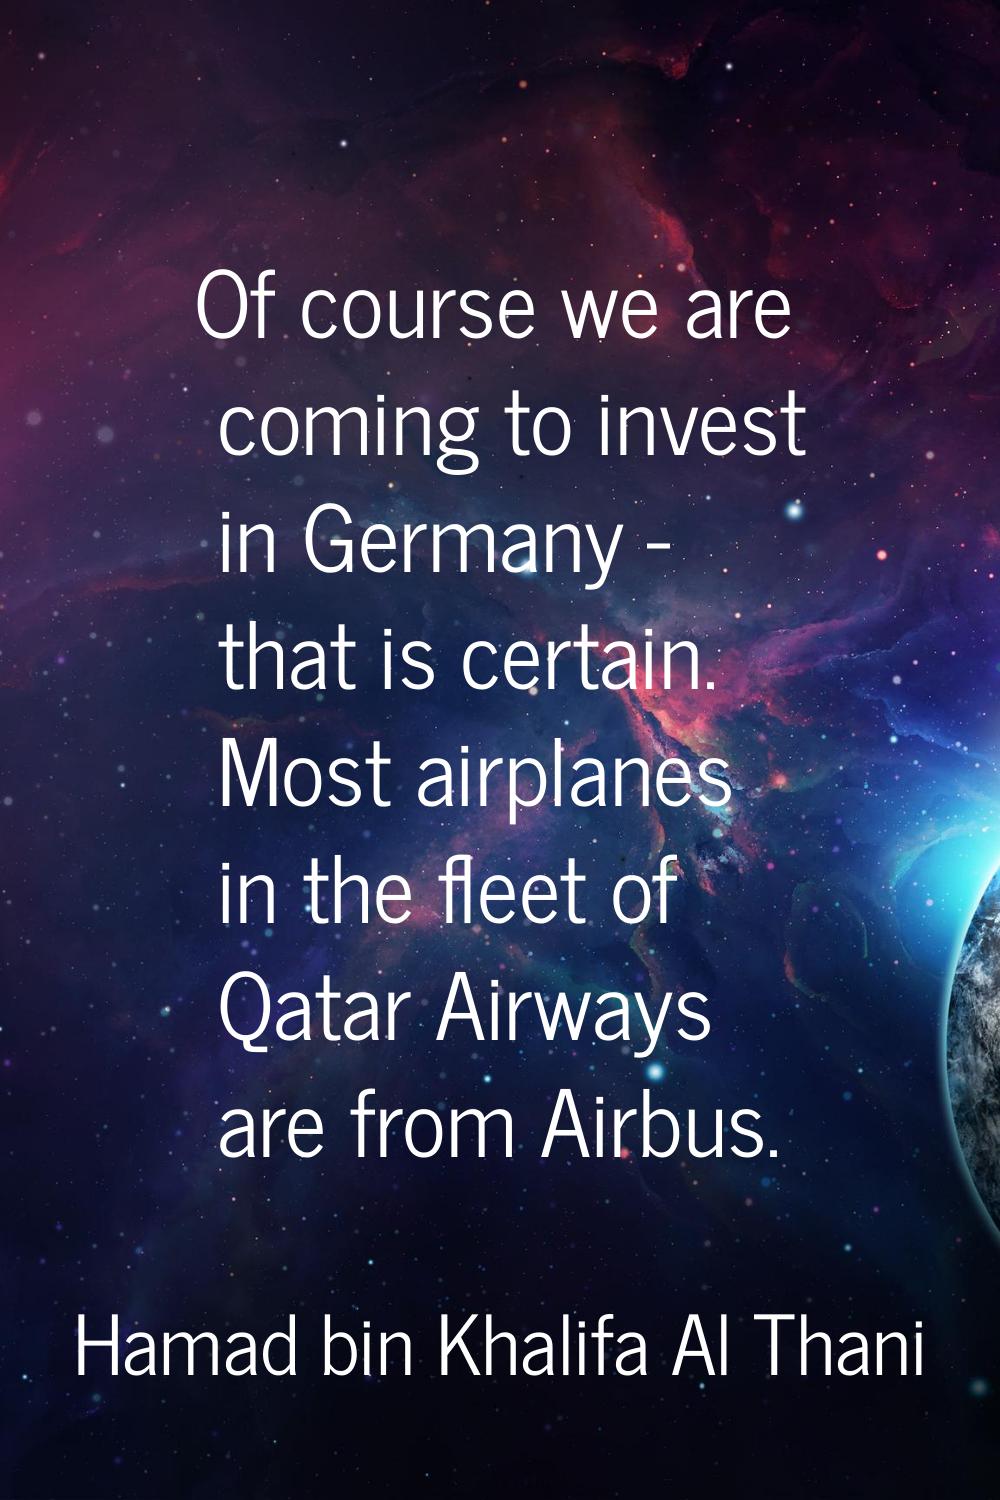 Of course we are coming to invest in Germany - that is certain. Most airplanes in the fleet of Qata